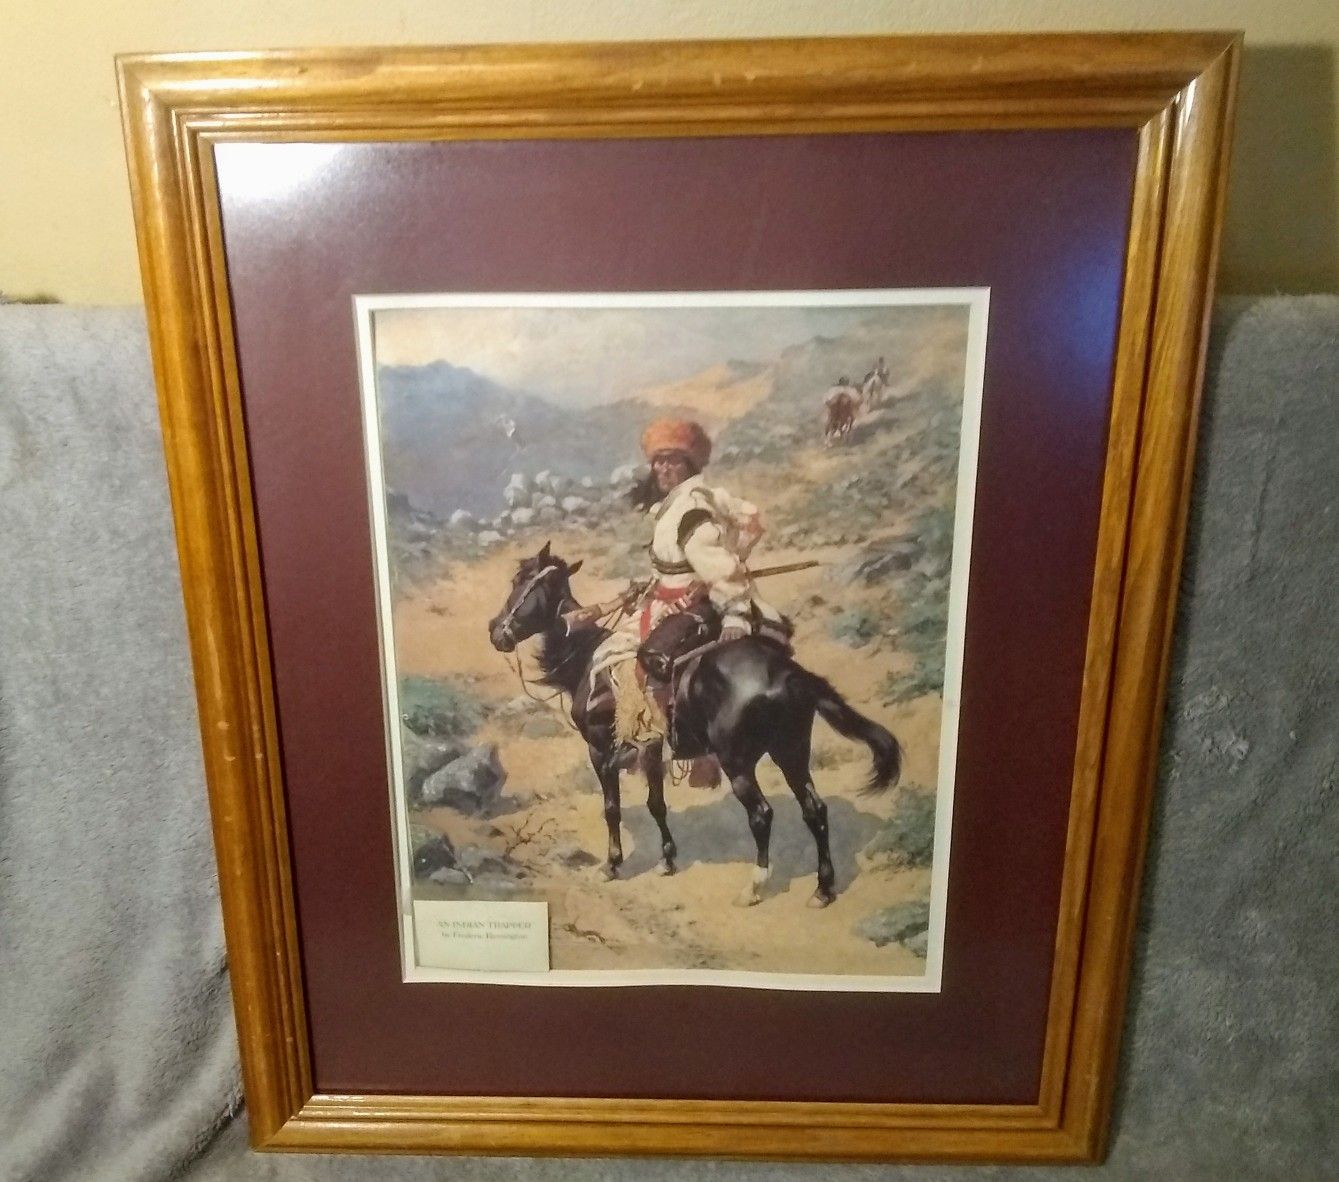 Frederic Remington "An Indian Trapper" Painting Print in Wood Frame